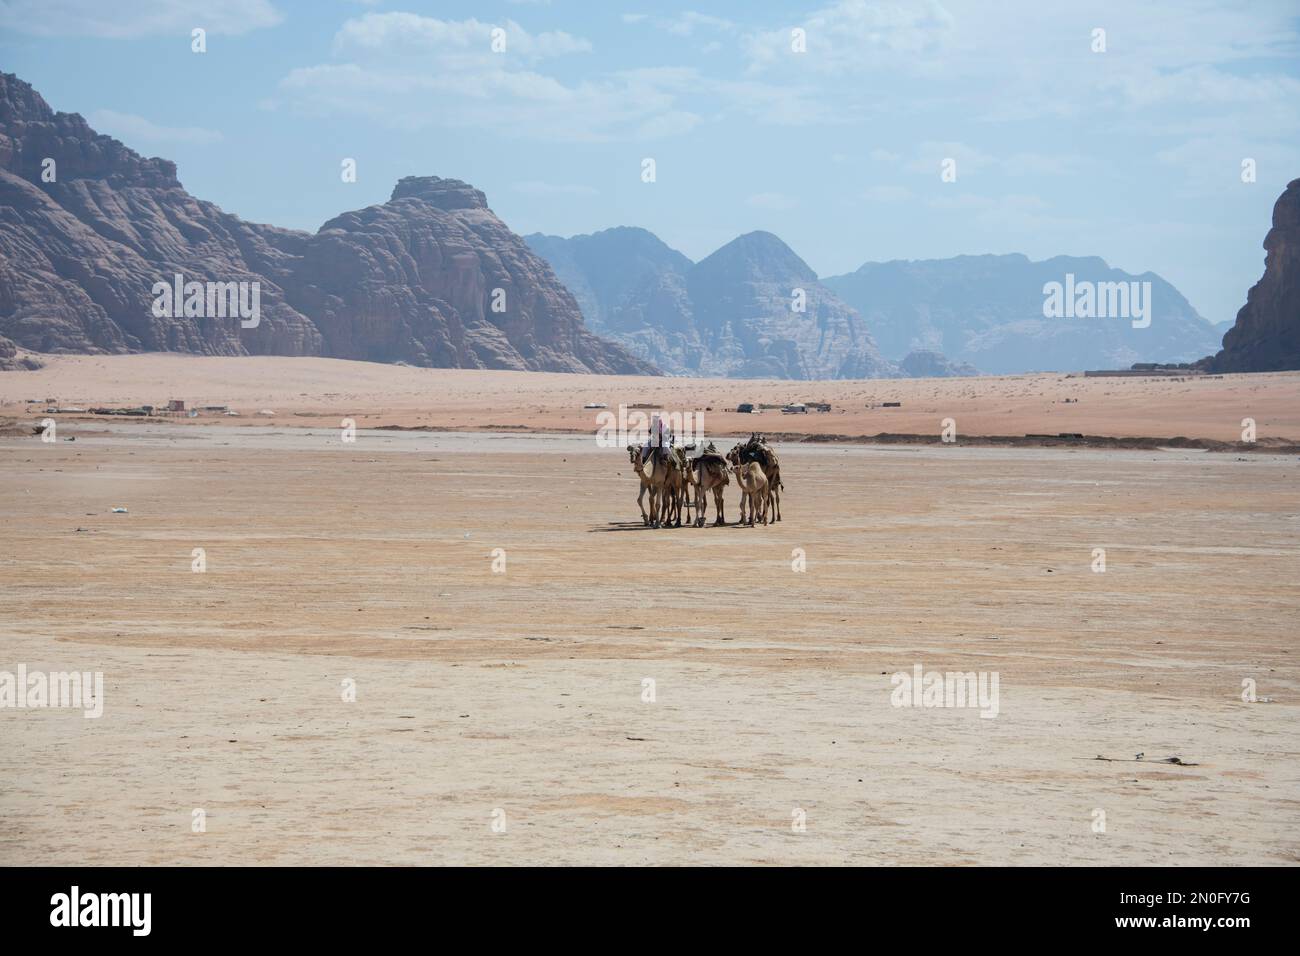 A Man with a flock of camels through the beautiful landscape of the desert Stock Photo